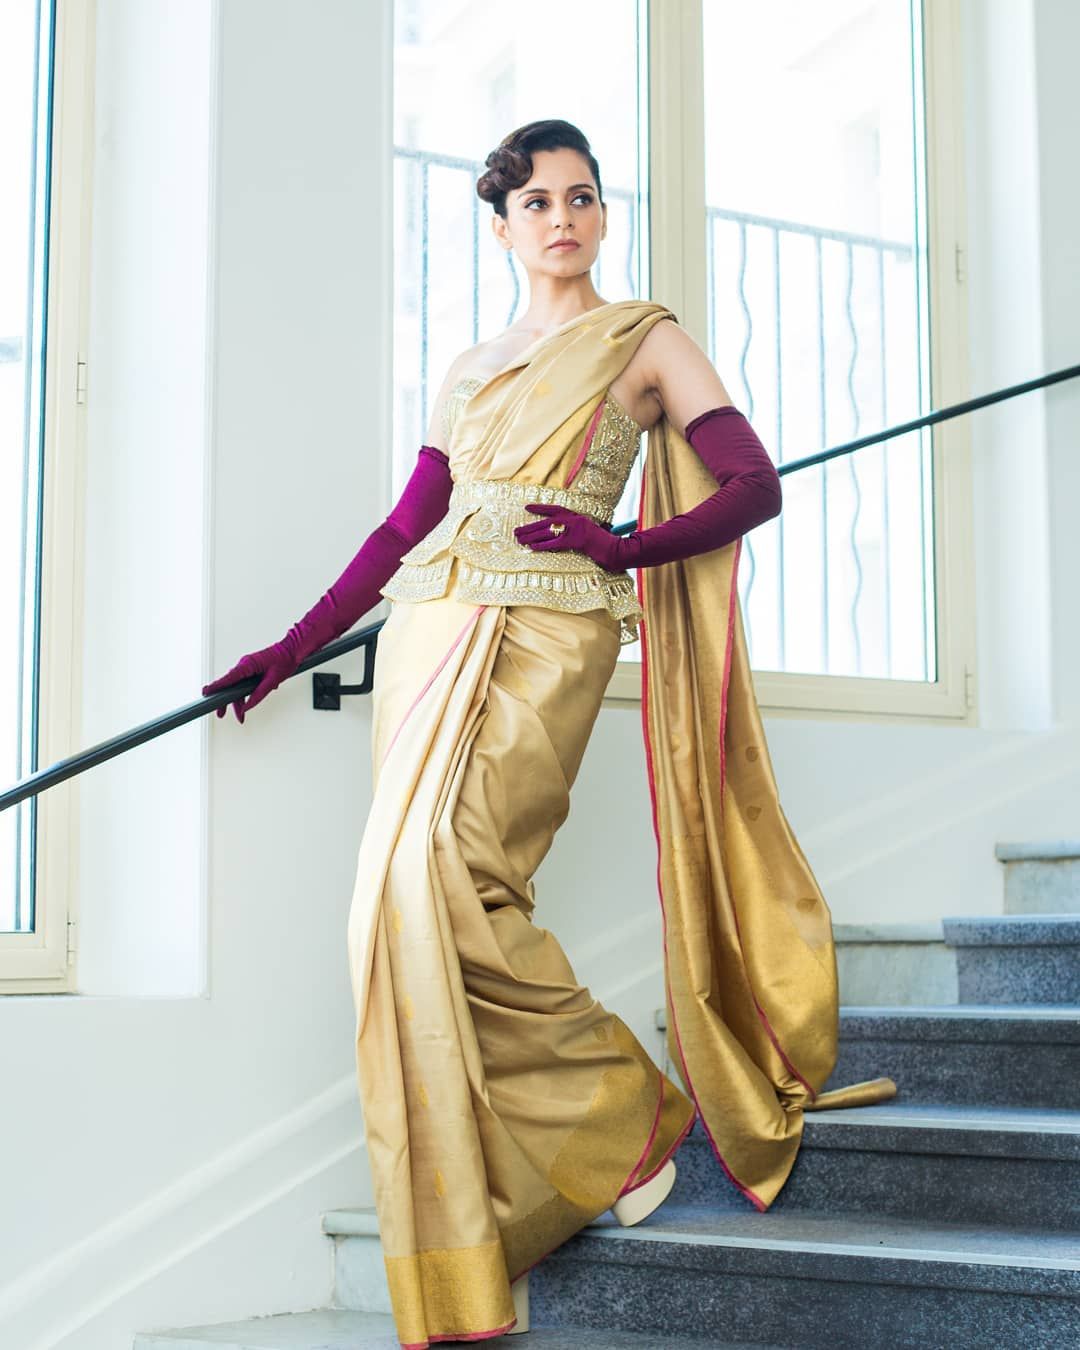 Kangana Ranaut Goes Vintage For Cannes 2019 Wearing A Kanjeevaram Saree With A Twist